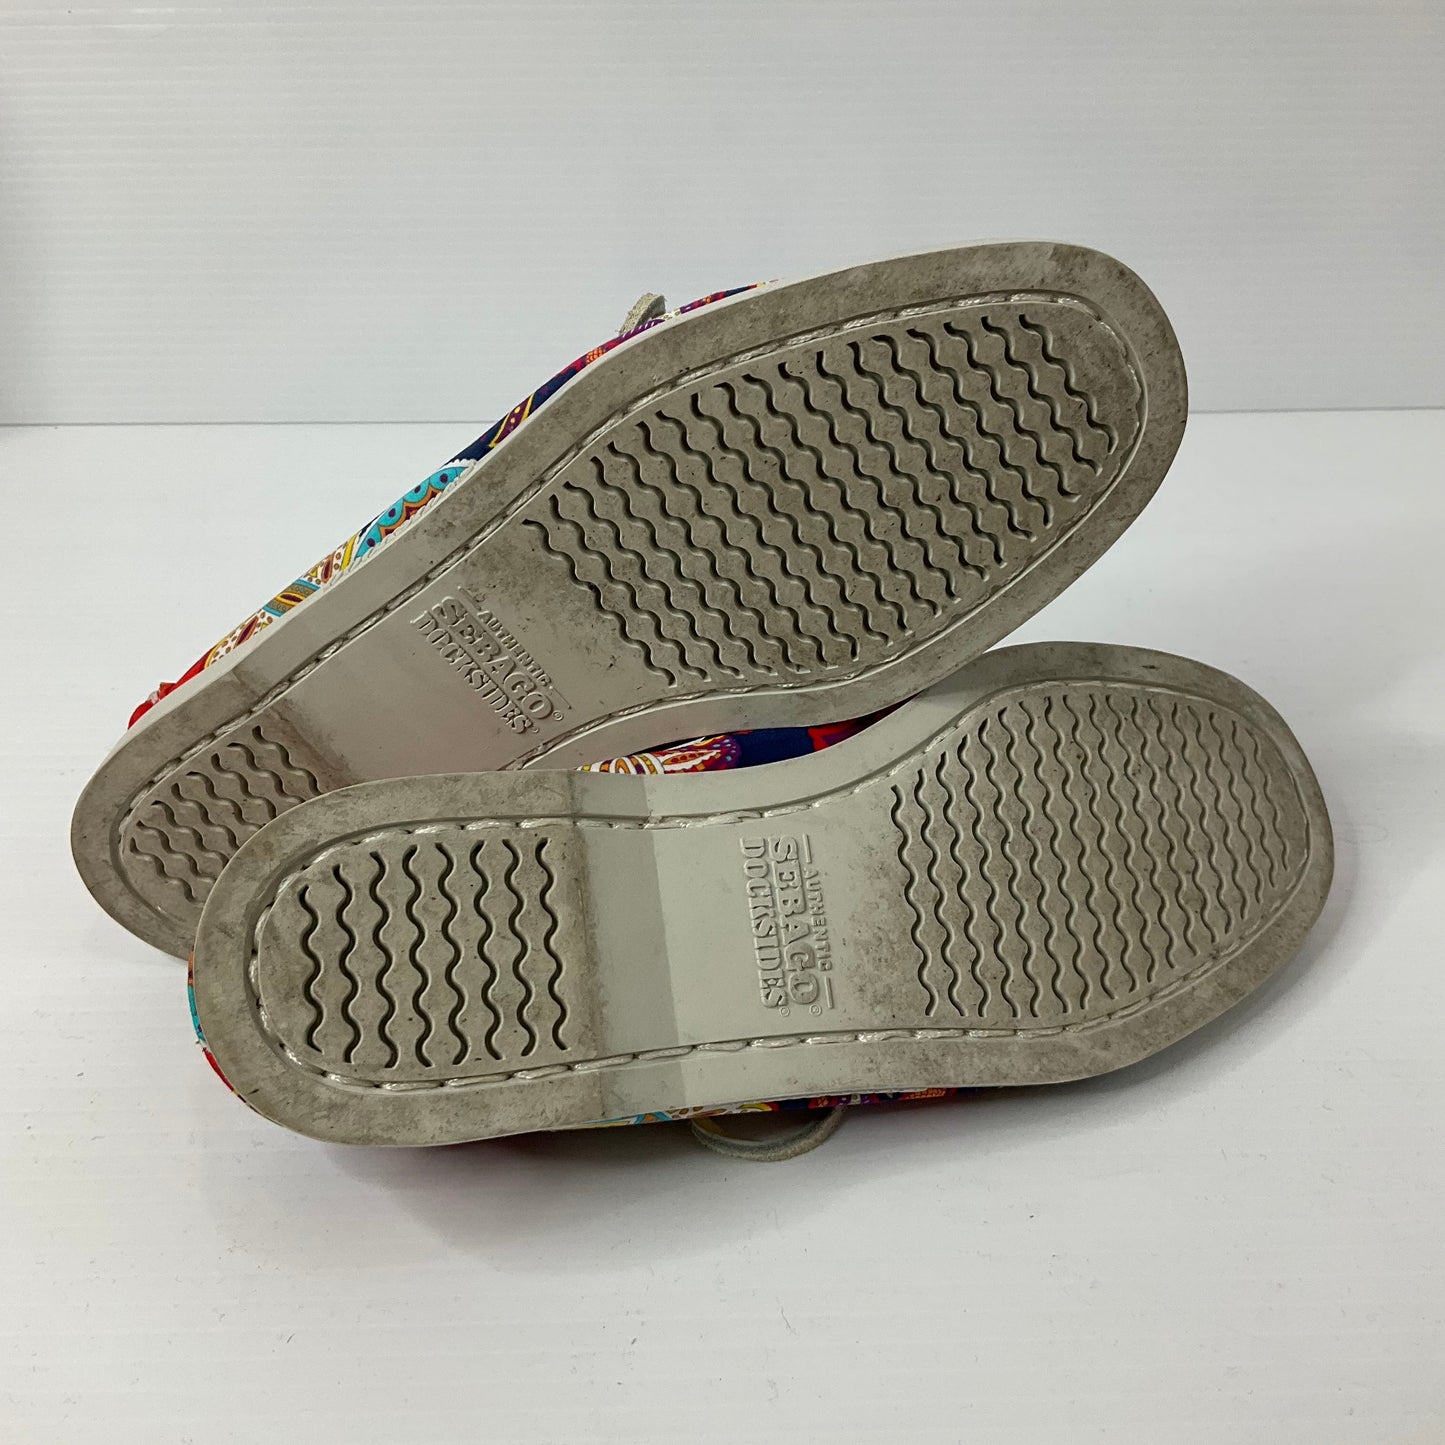 Multi-colored Shoes Flats Clothes Mentor, Size 5.5